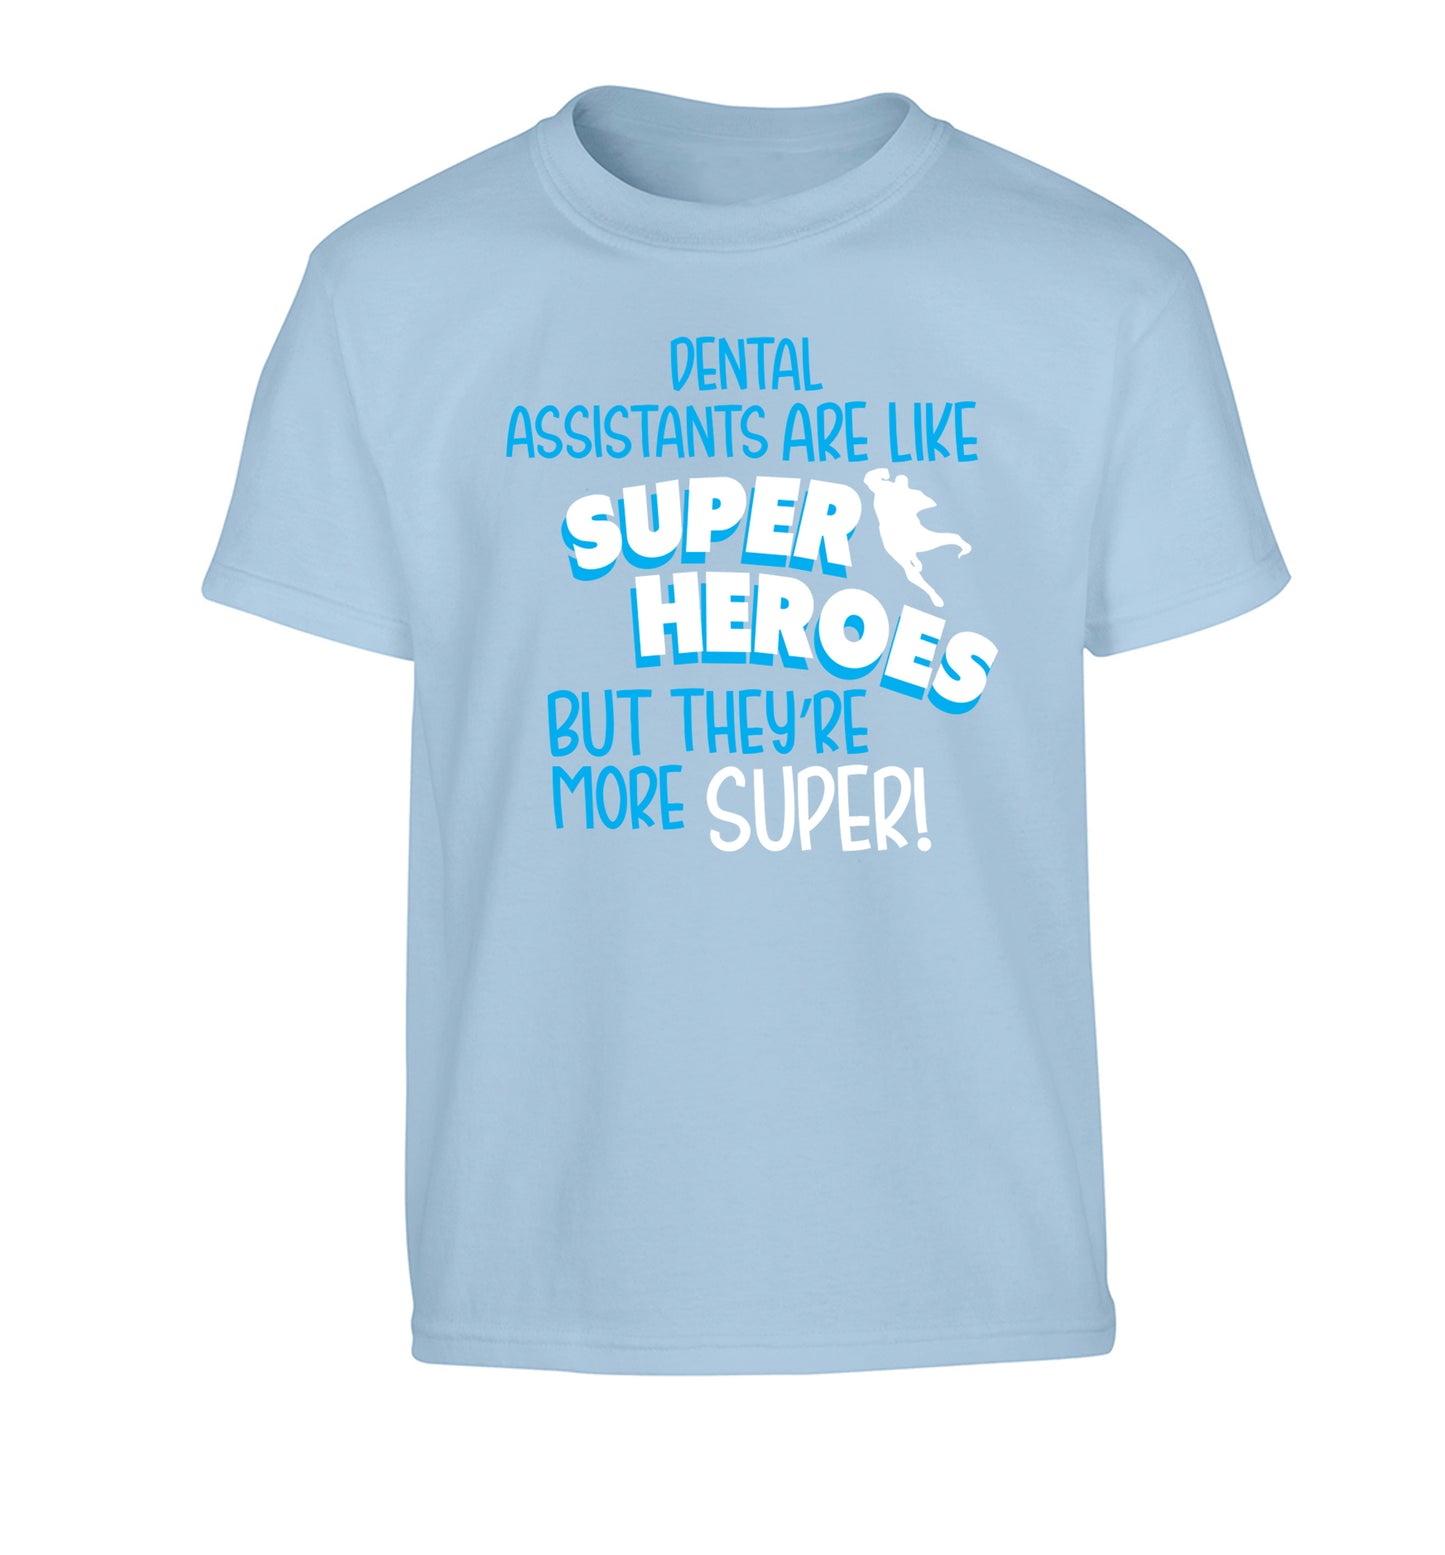 Dental Assistants are like superheros but they're more super Children's light blue Tshirt 12-13 Years